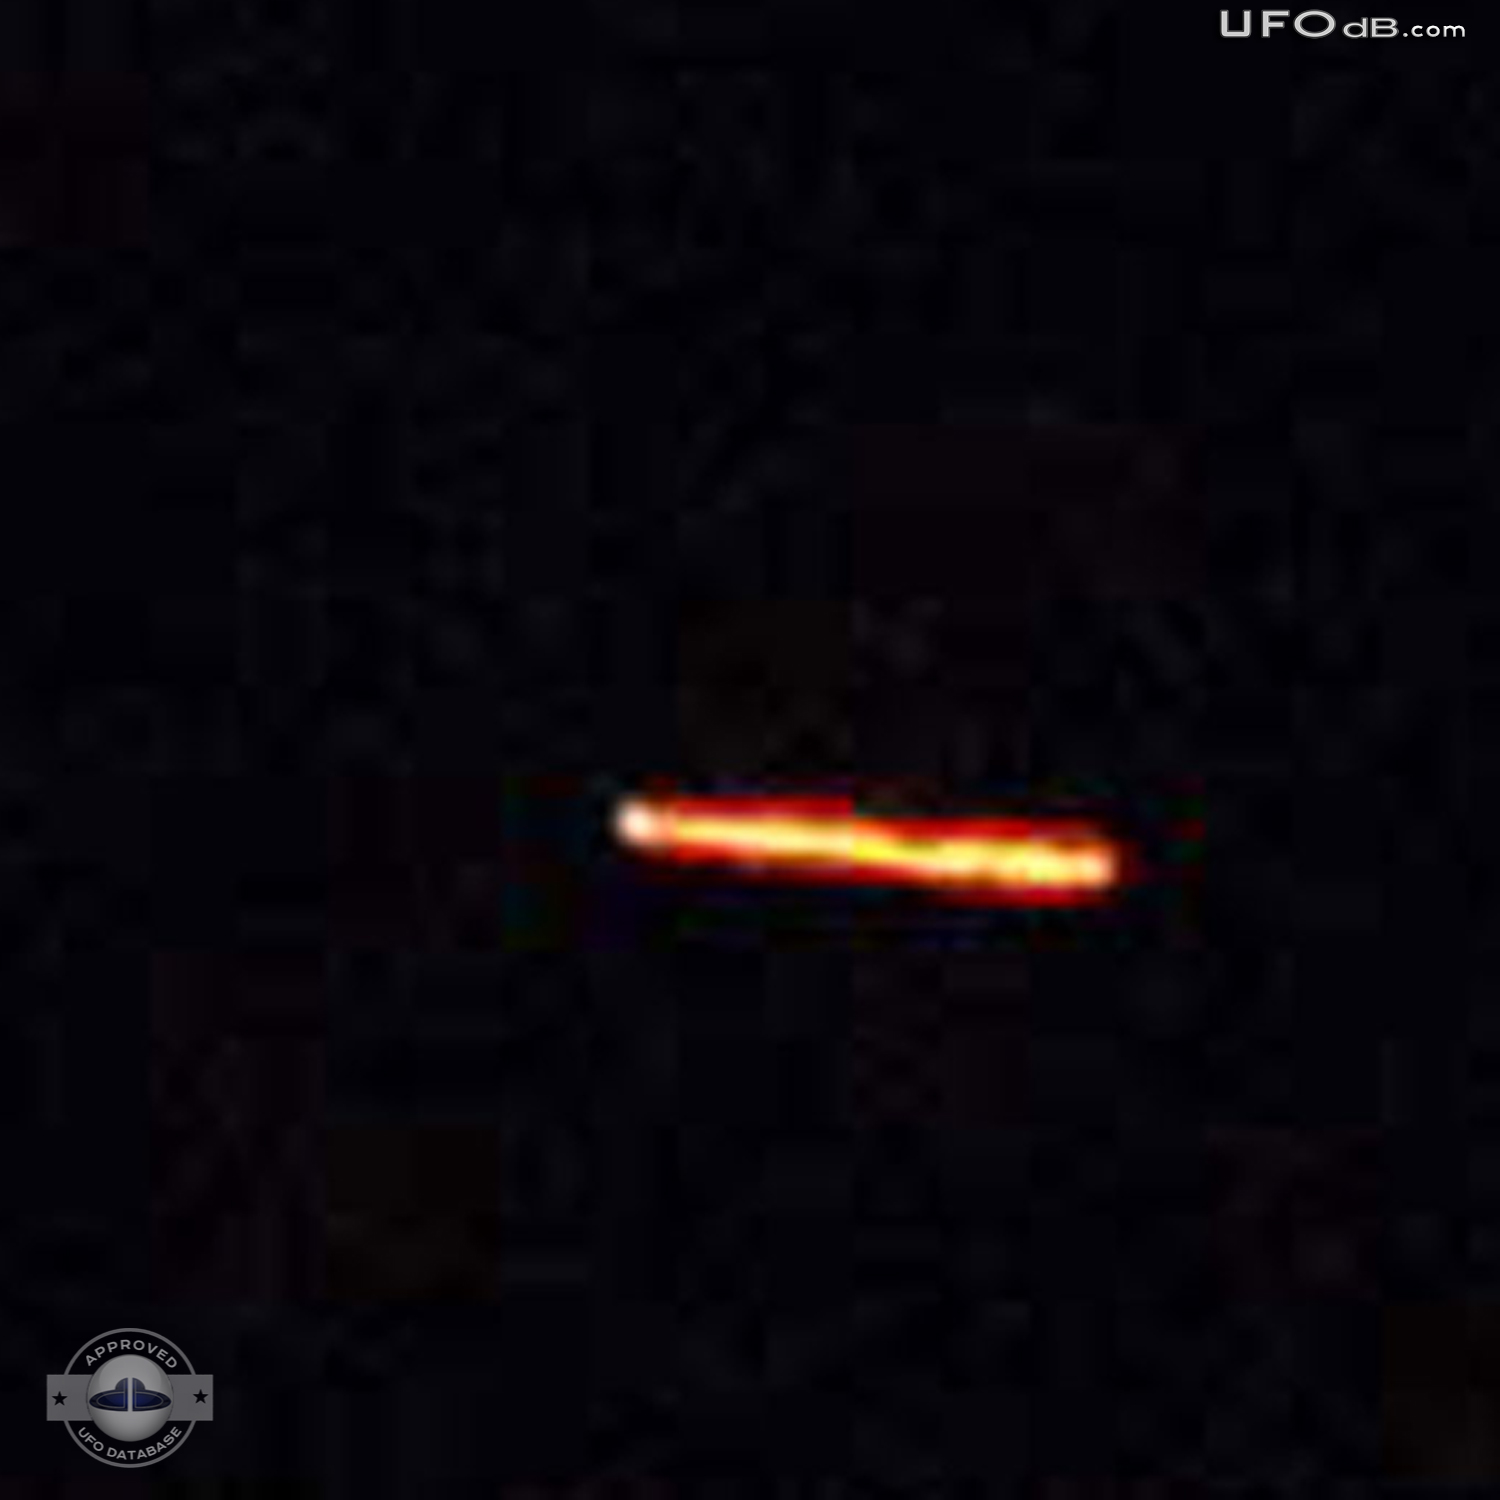 Two orbs UFO over Agimak Lake near Ignace in Ontario Canada, July 2011 UFO Picture #357-3